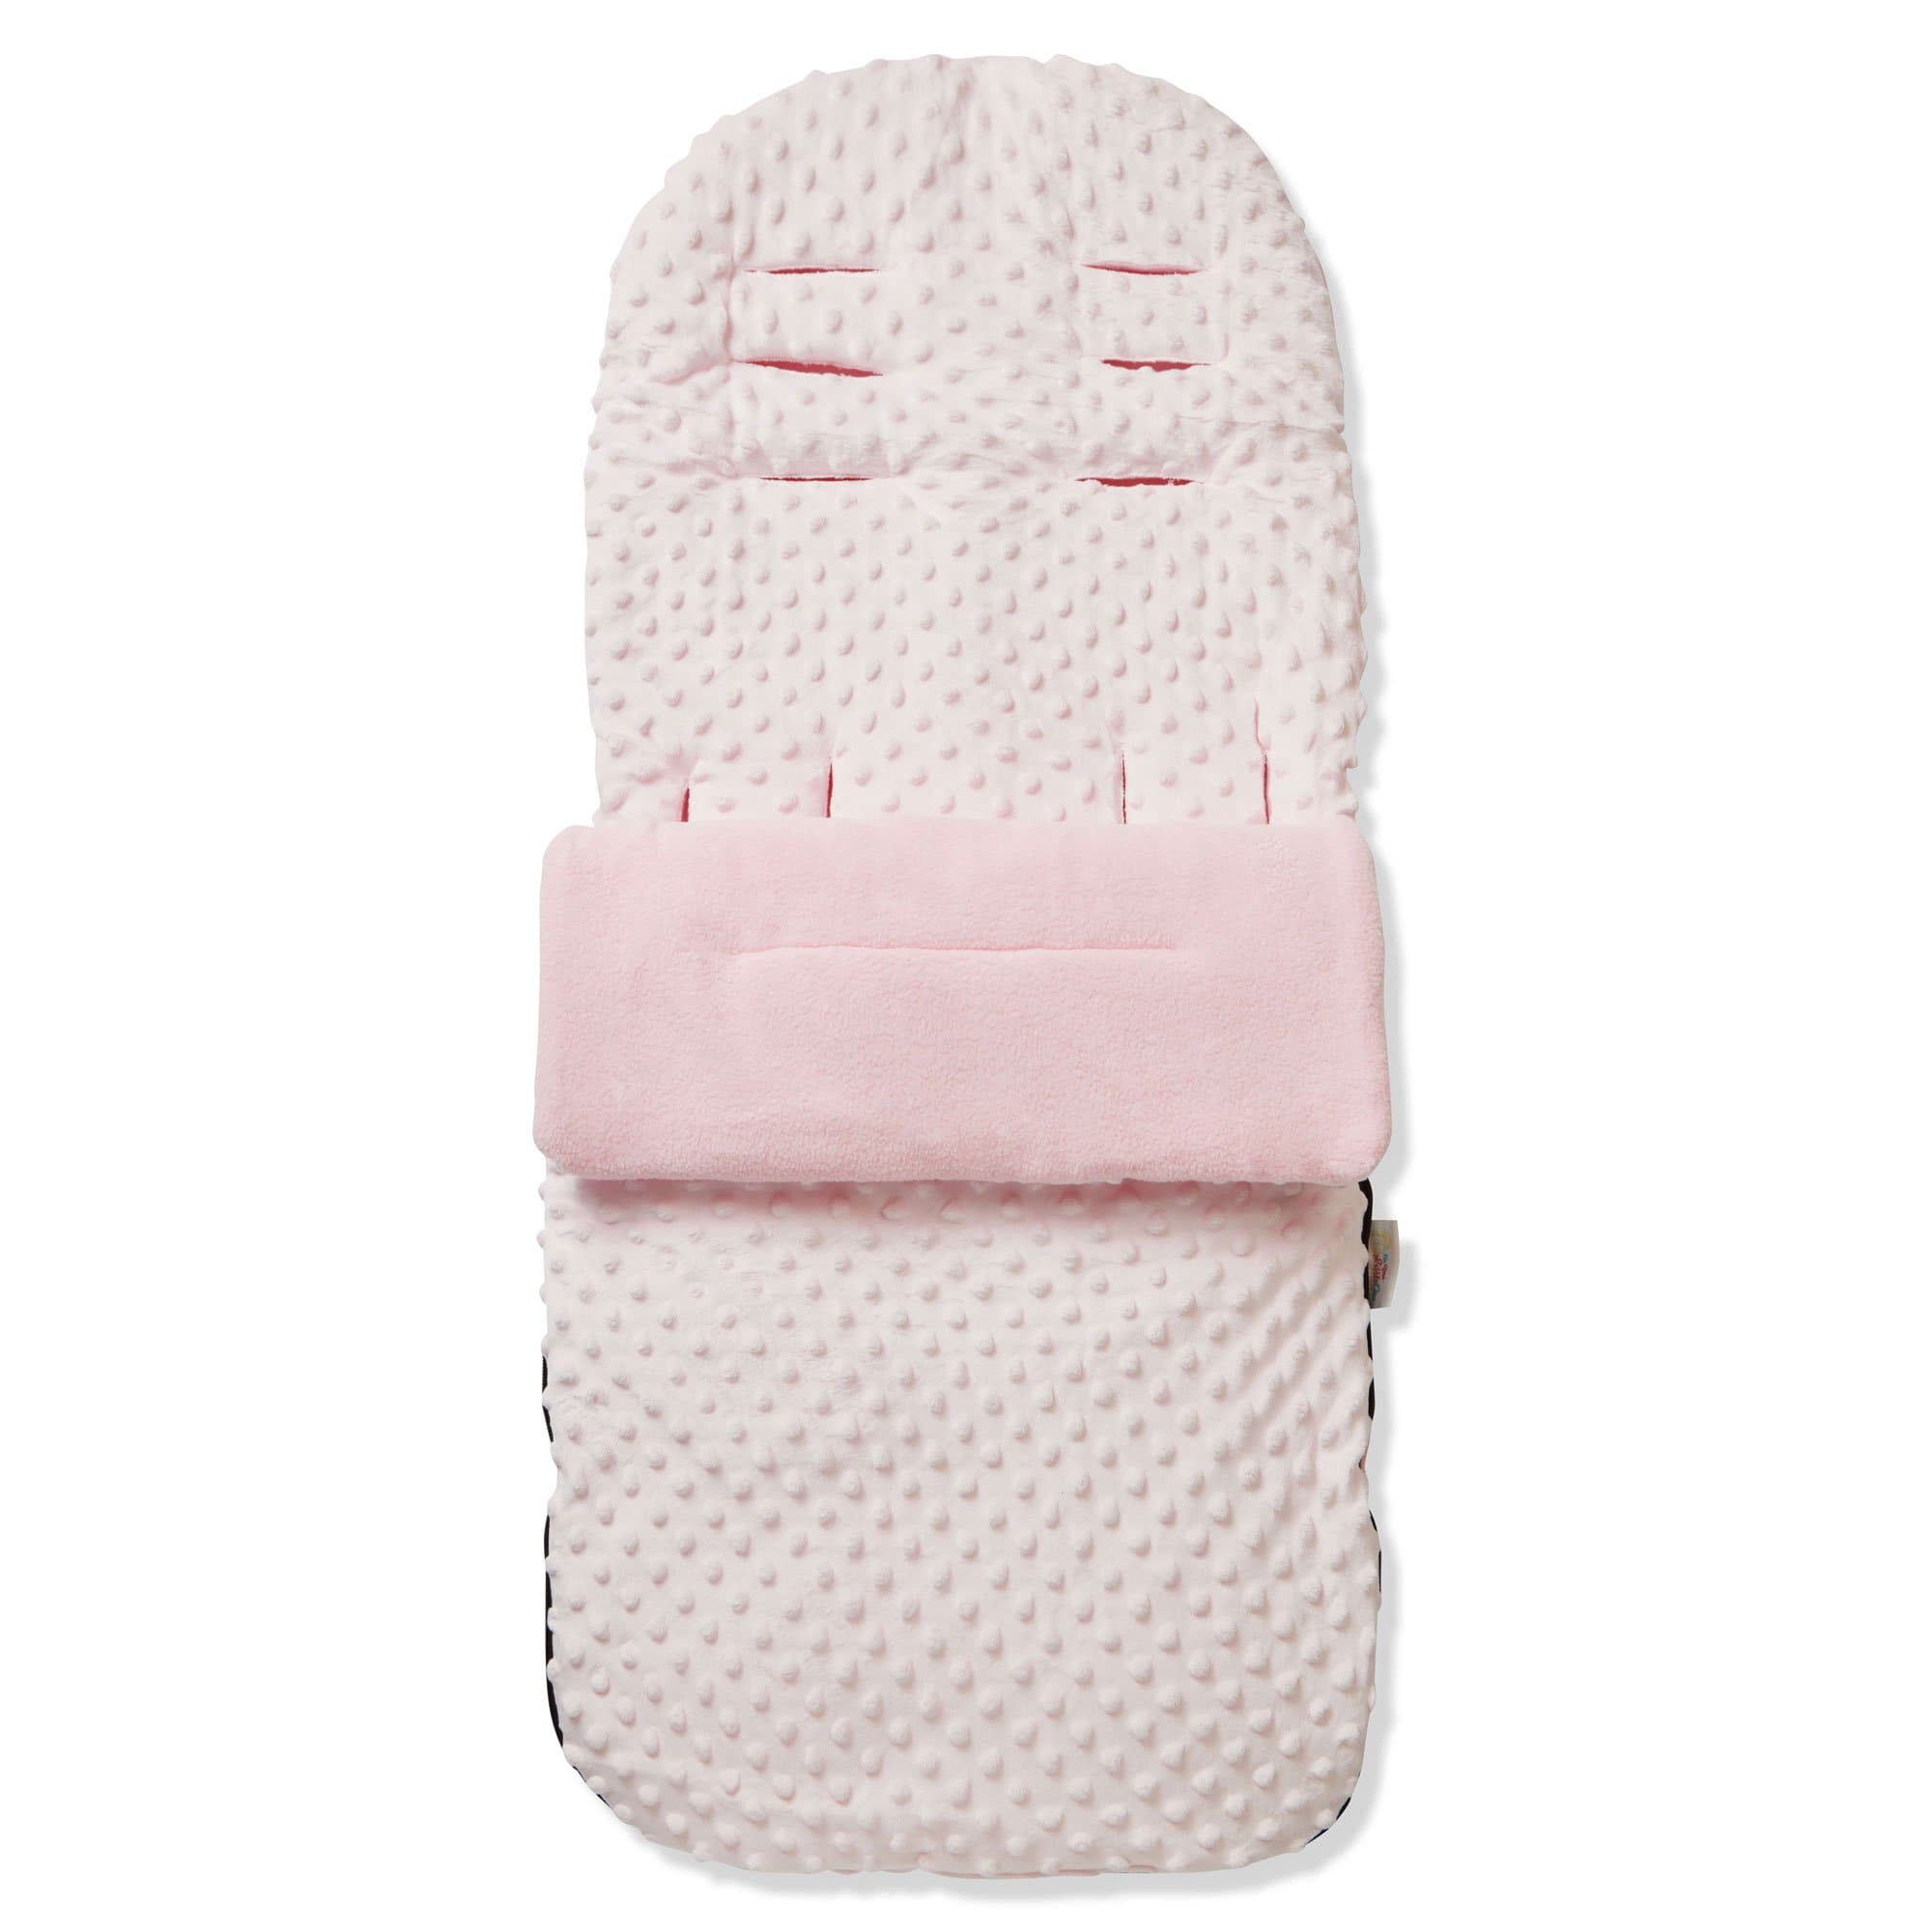 Dimple Footmuff / Cosy Toes Compatible with Maclaren - Pink / Fits All Models | For Your Little One